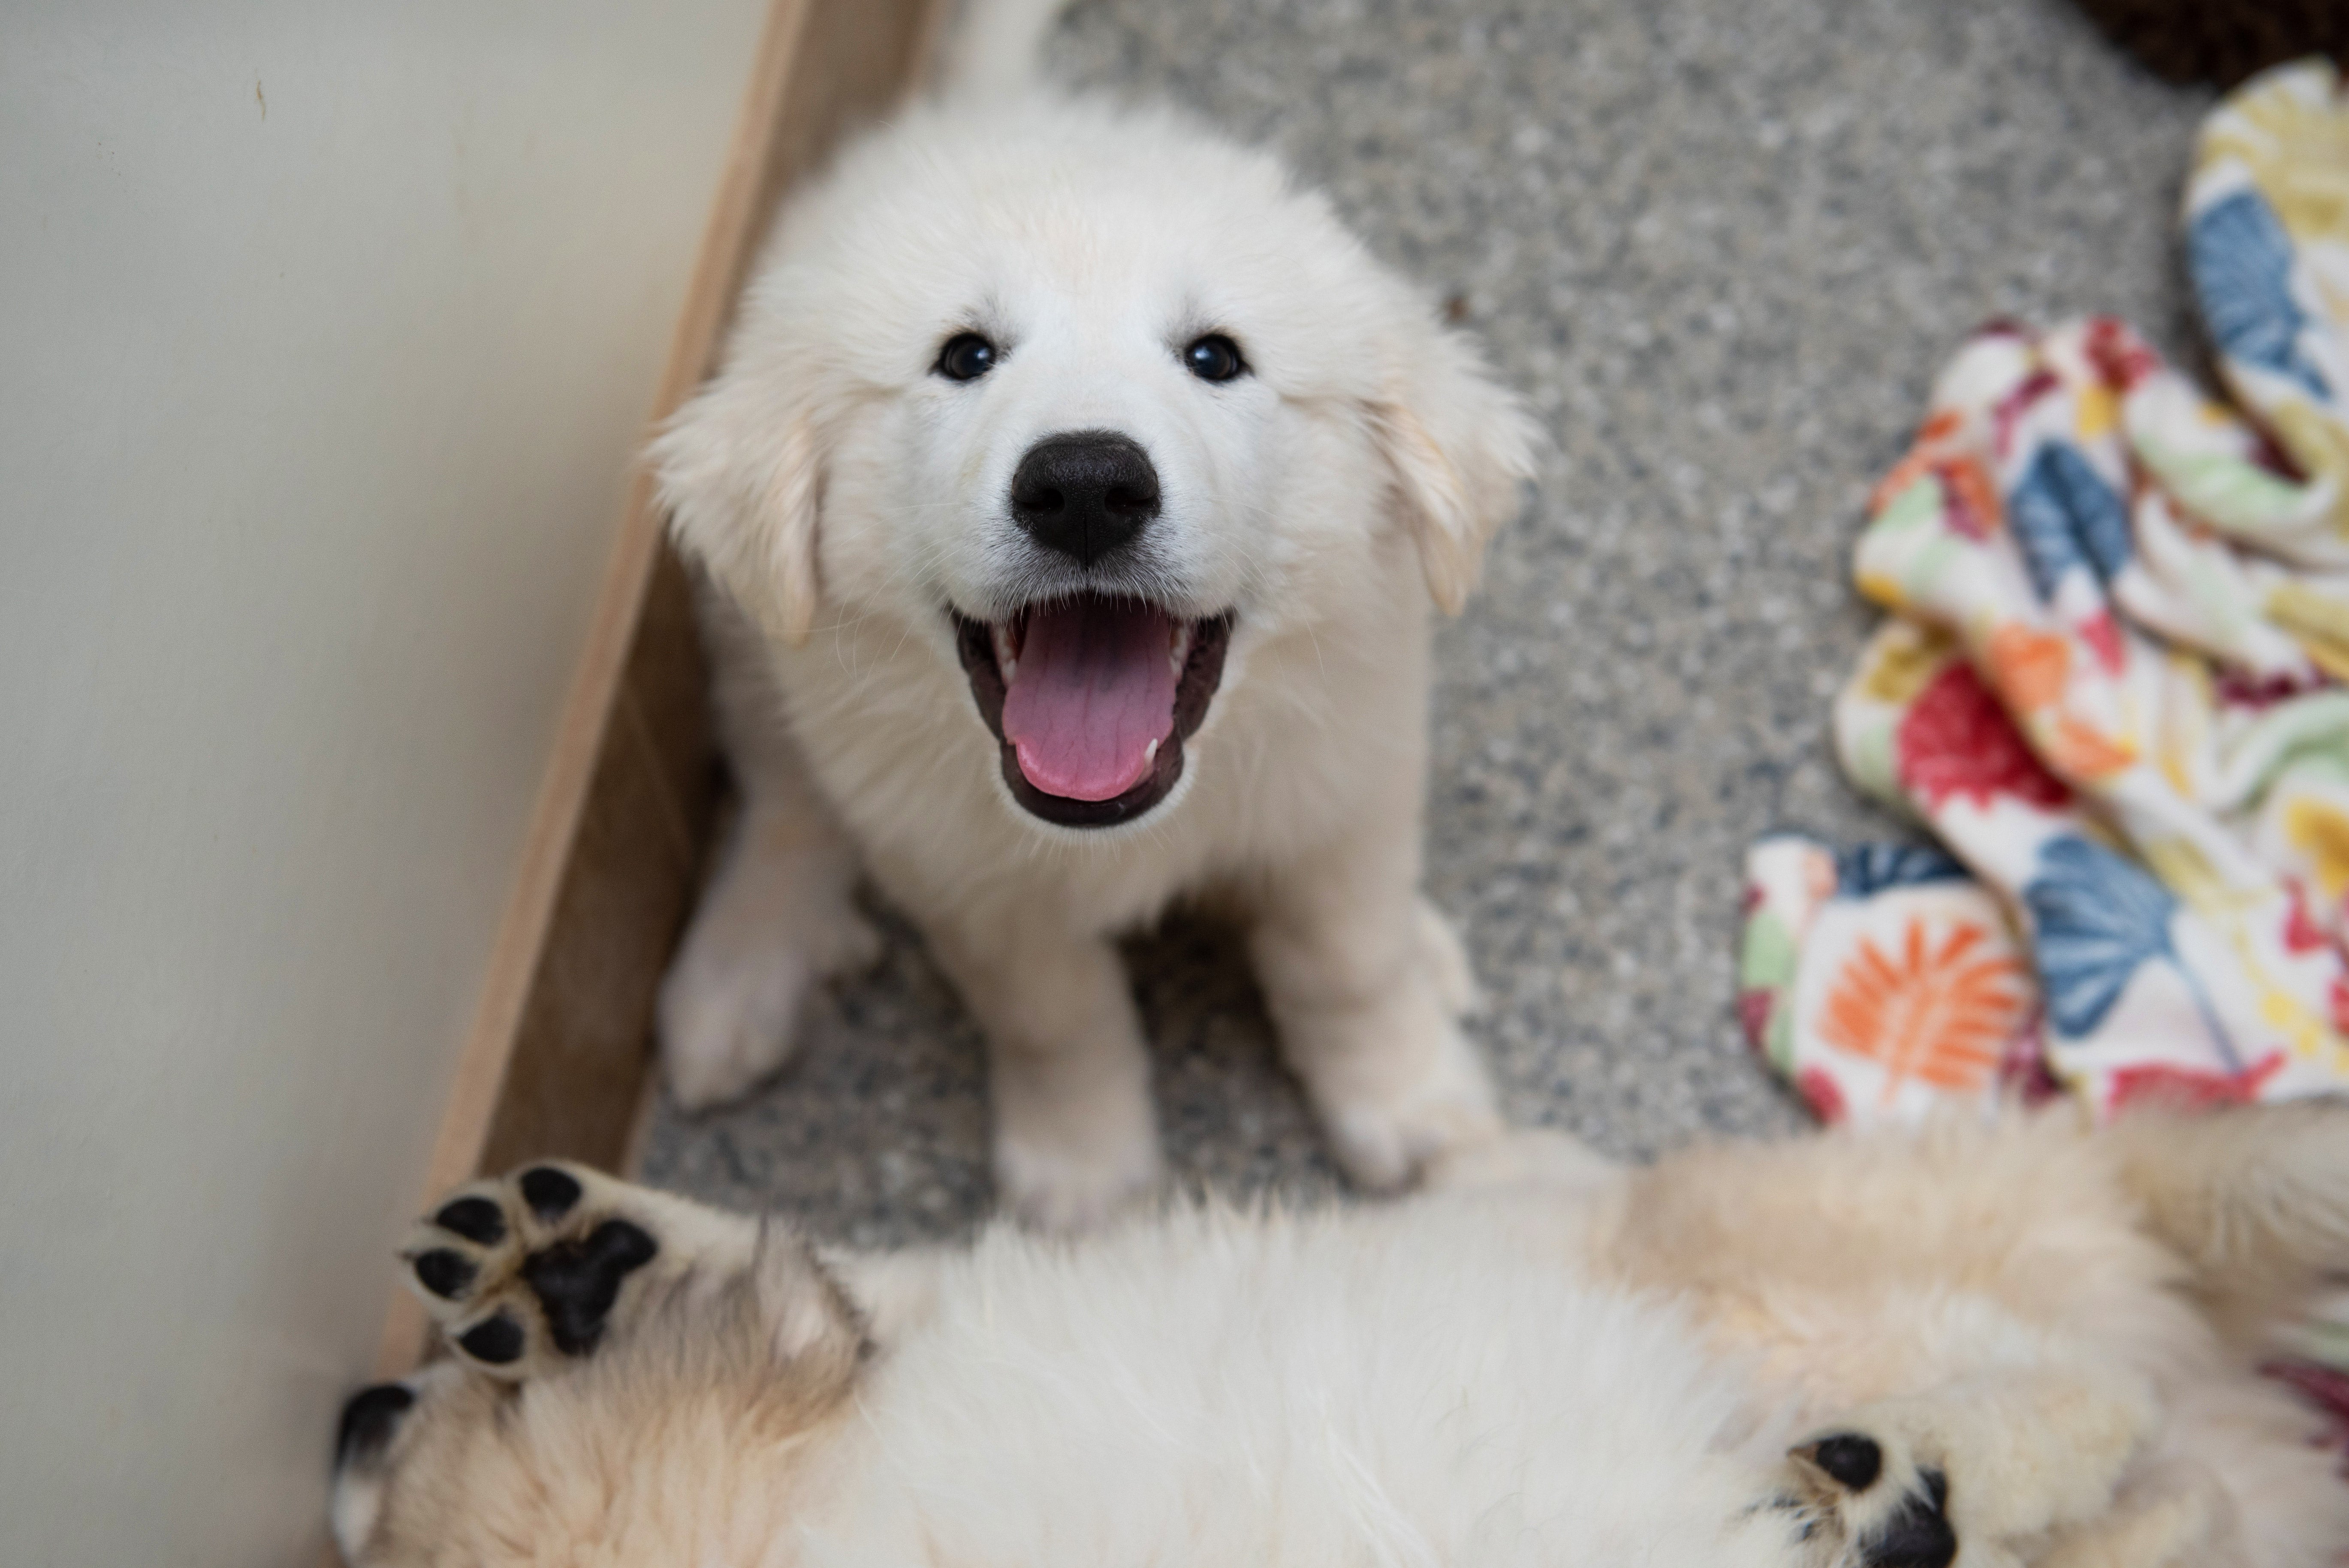 White puppy, with mouth open in a smile